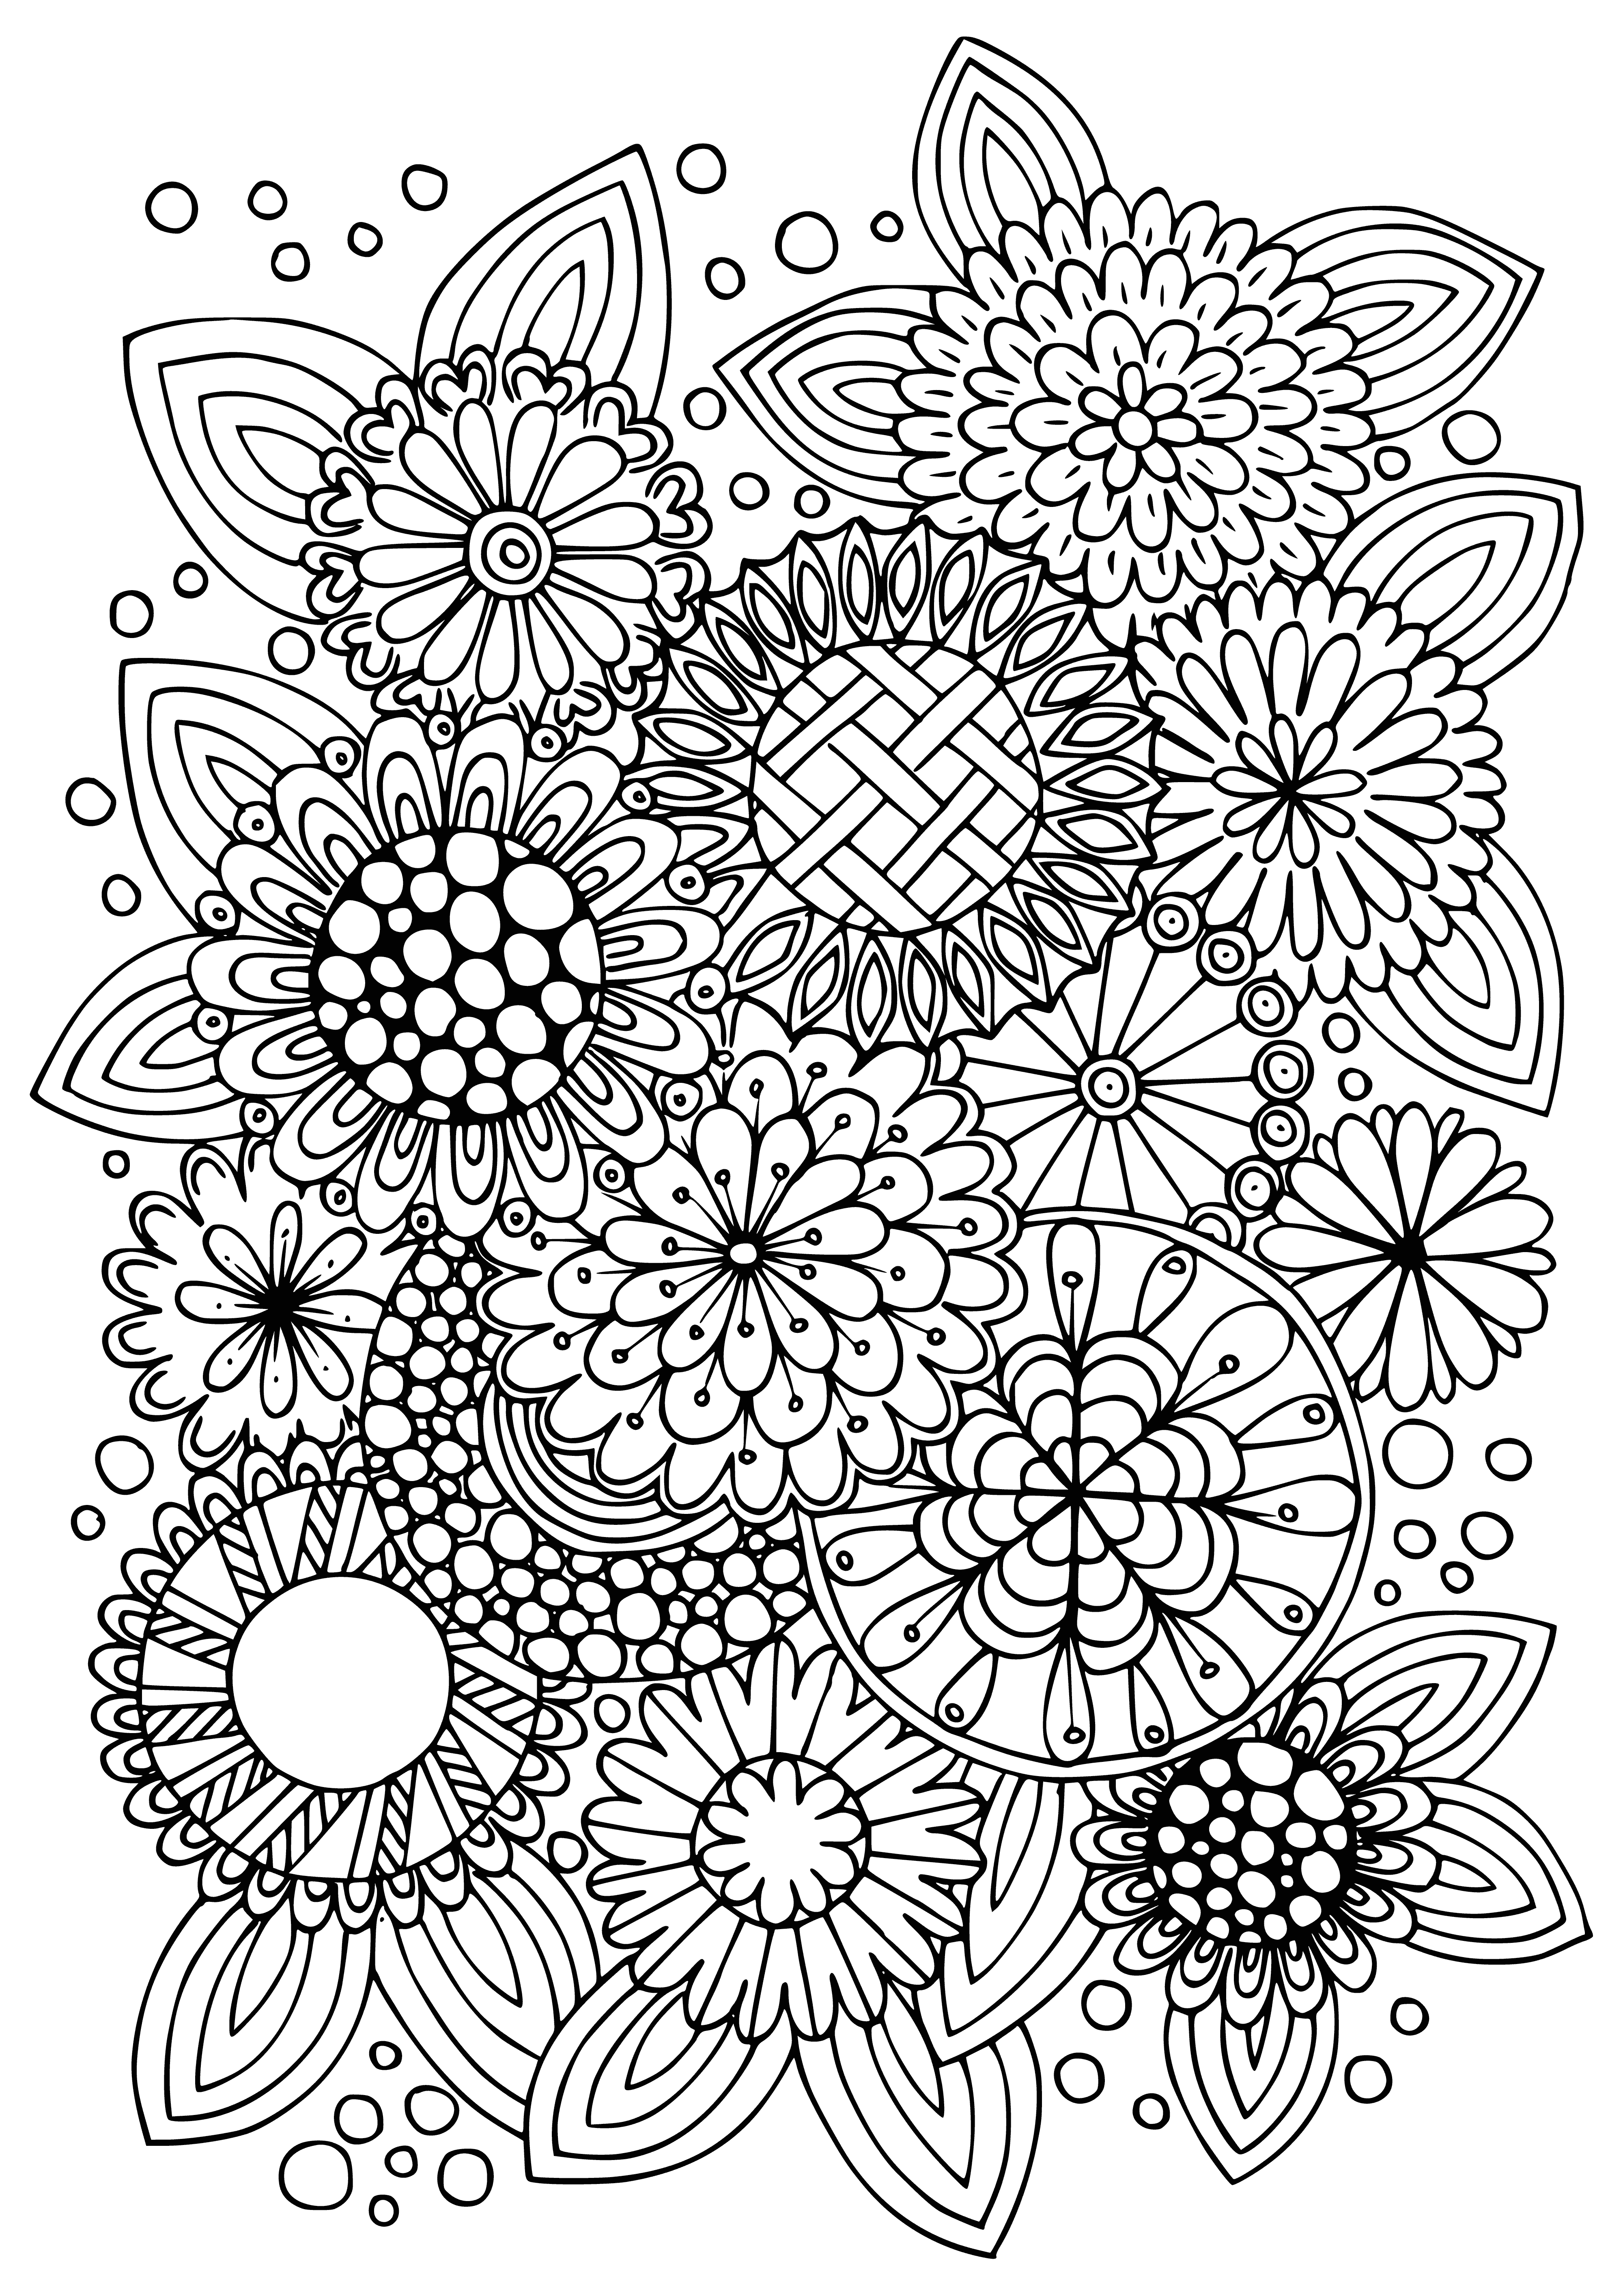 coloring page: 140 characters: A variety of flowers in different stages of bloom & colors ranging from white to pink to purple; mixed with green leaves - perfect for adults to color!